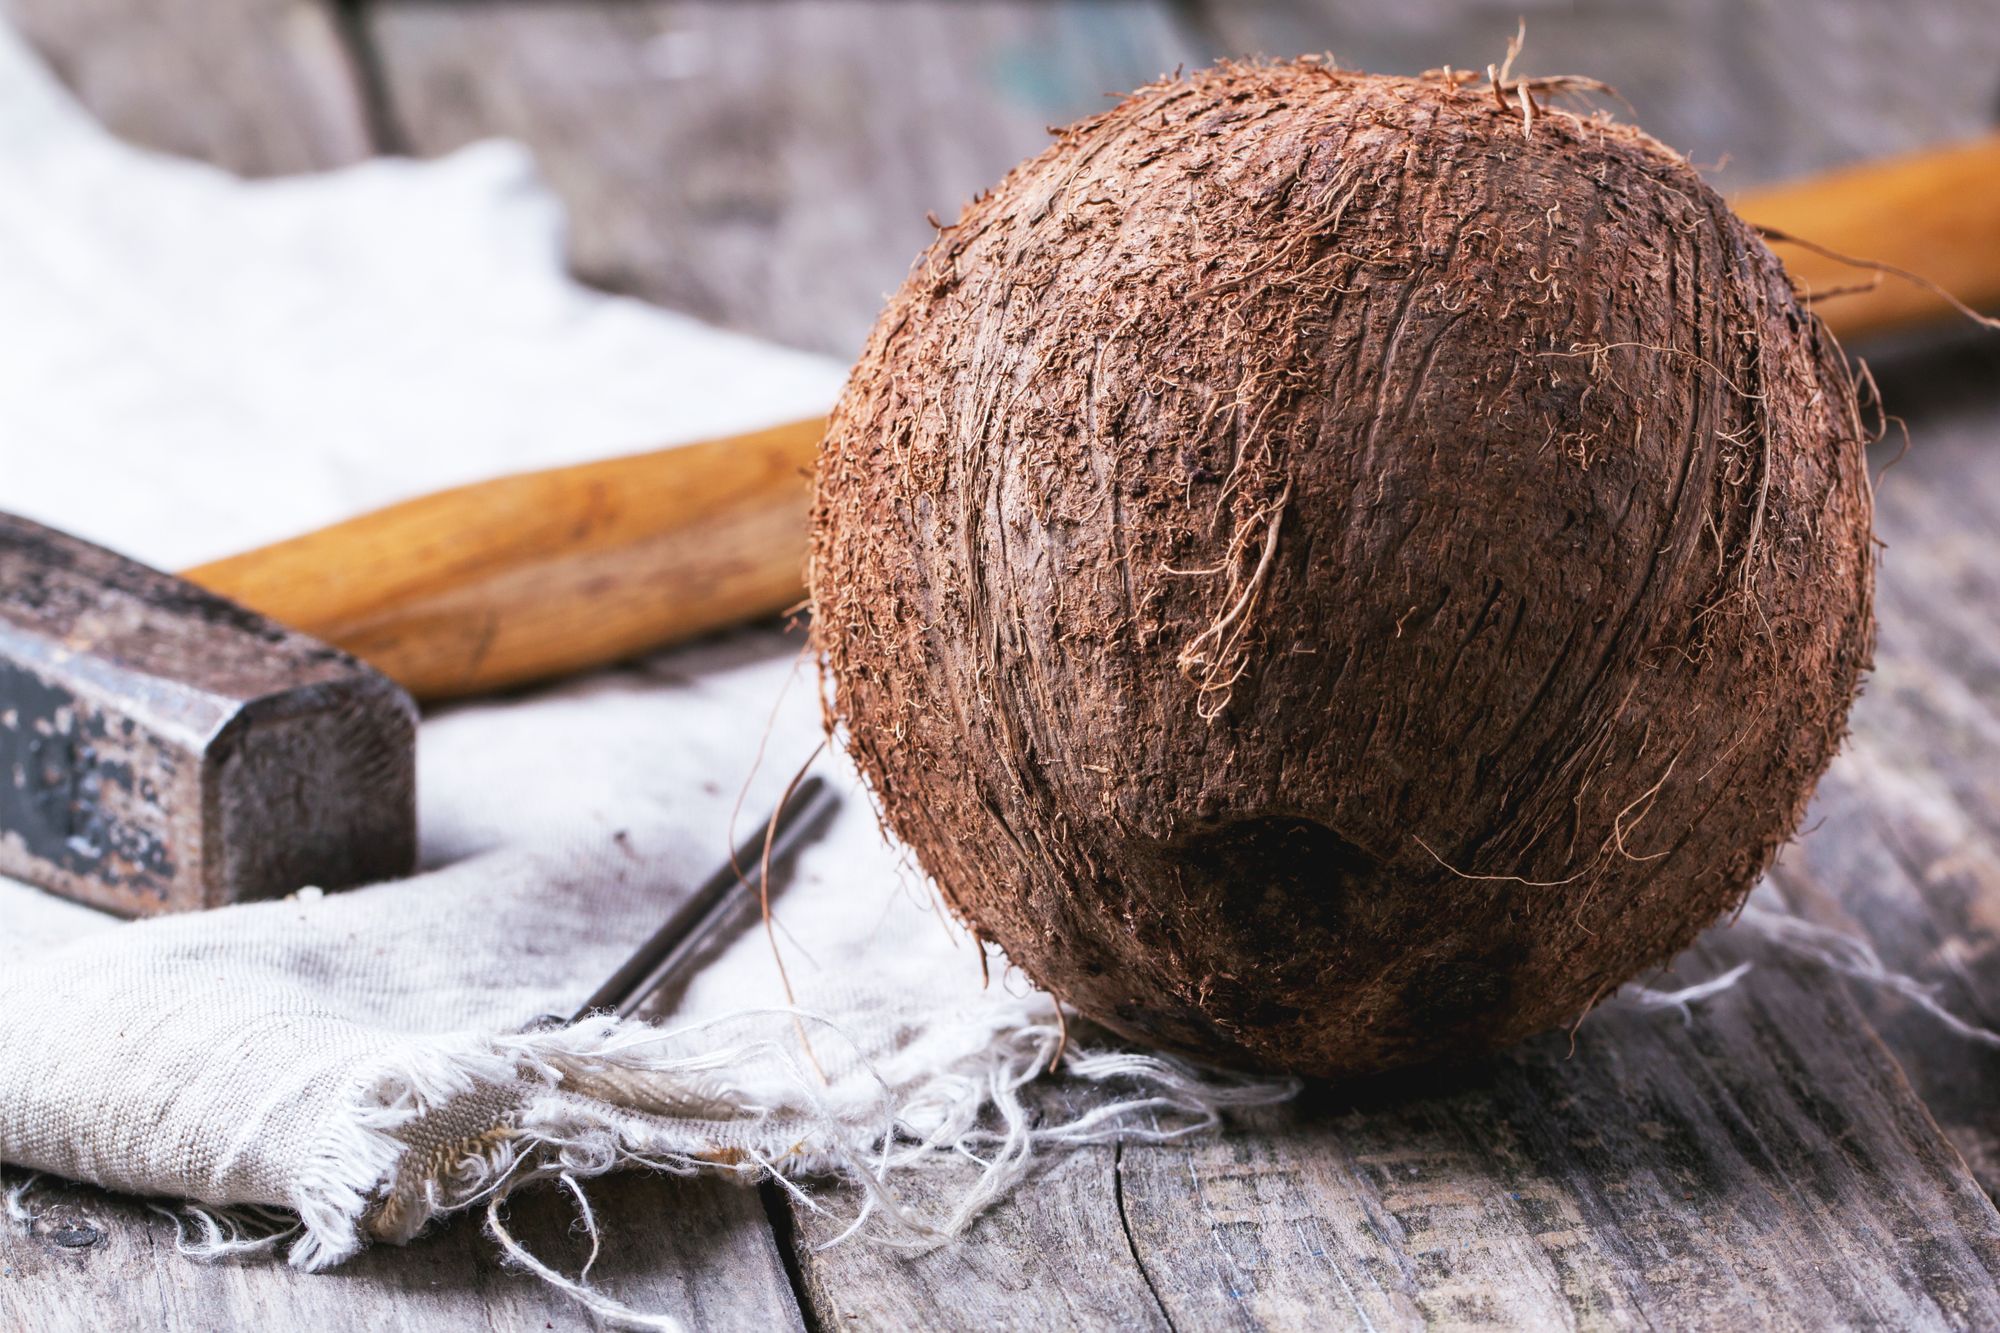 12 things not to put on your face - coconut oil